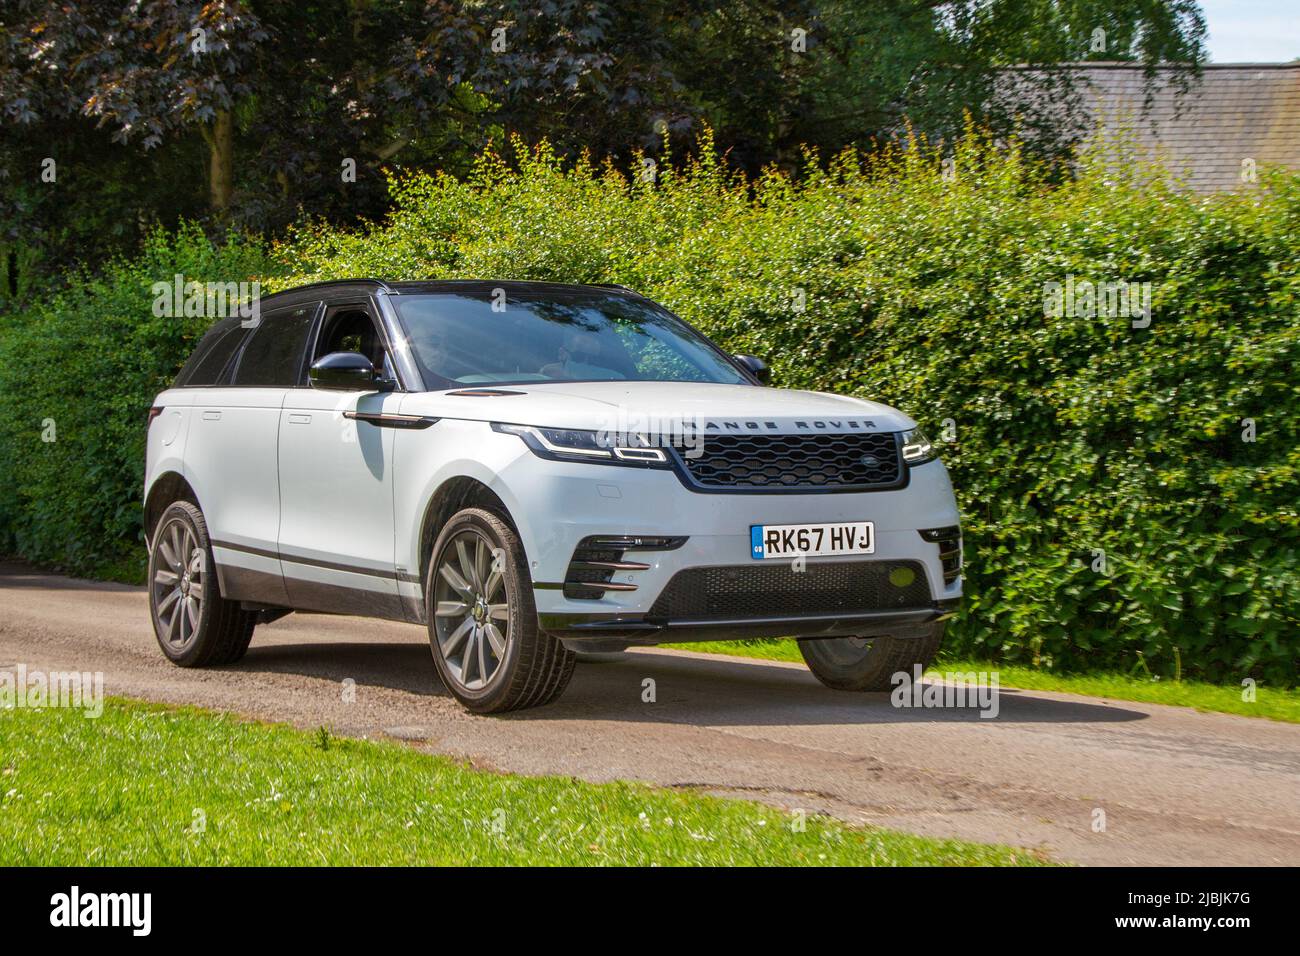 2017 (67) white Land Rover Range Rover VELAR  2993cc sequential automatic arriving in Worden Park Motor Village, Leyland, UK Stock Photo